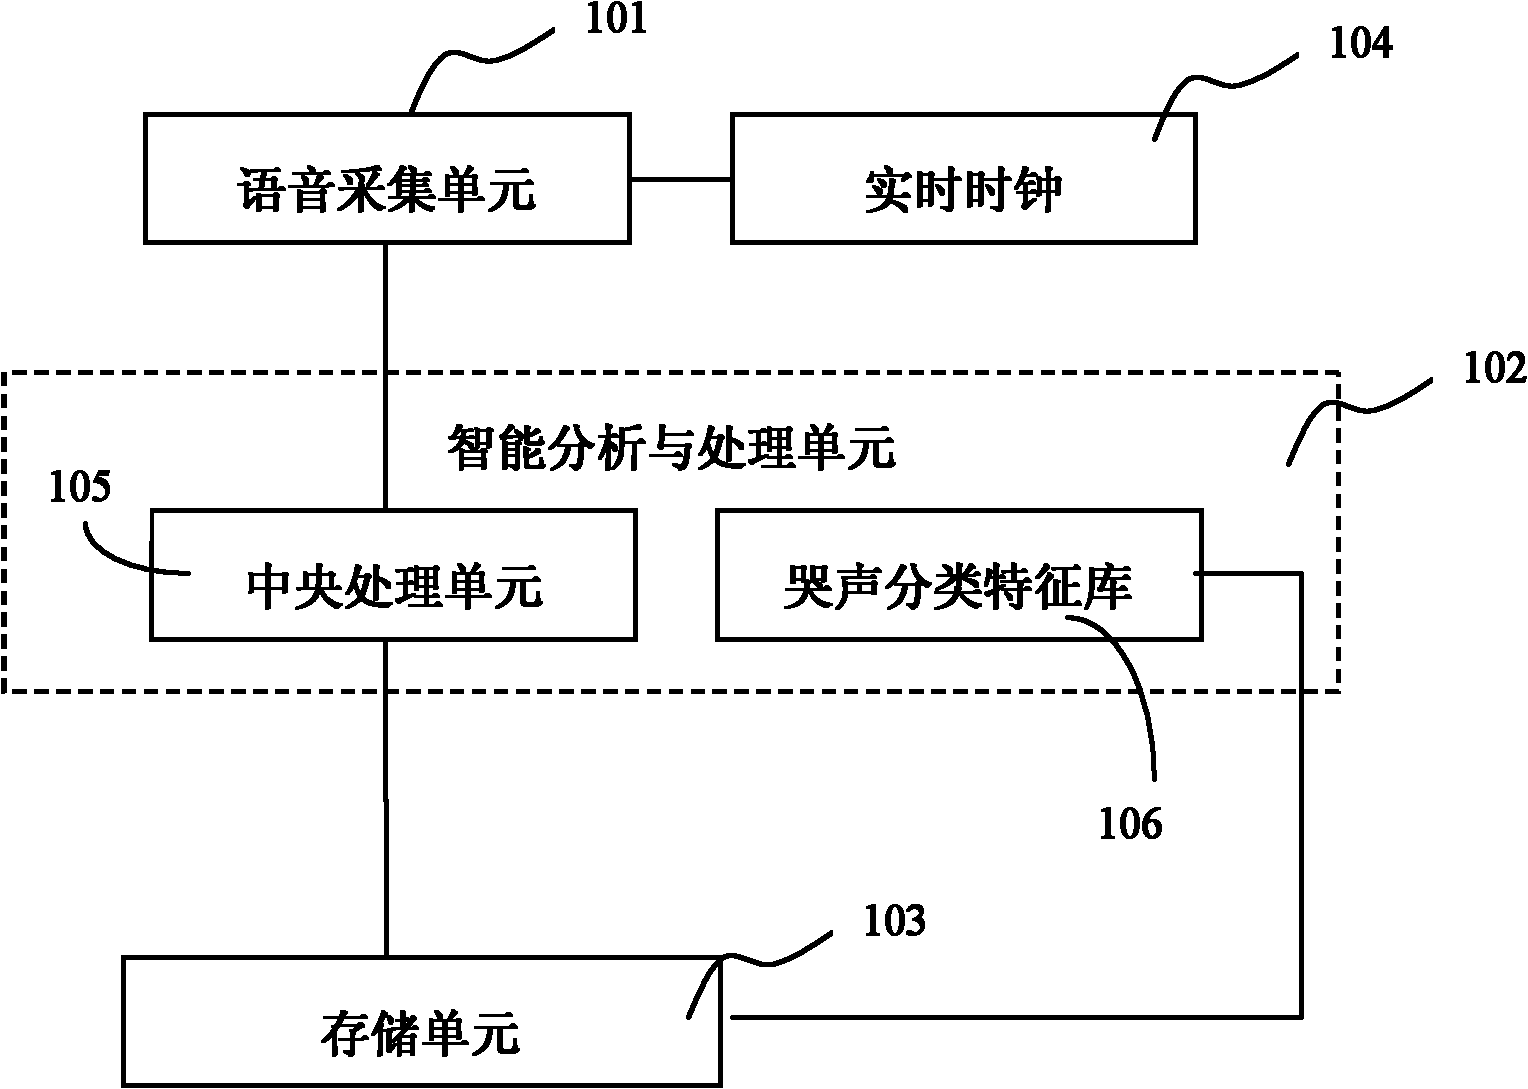 Device and method for automatically recording crying of babies